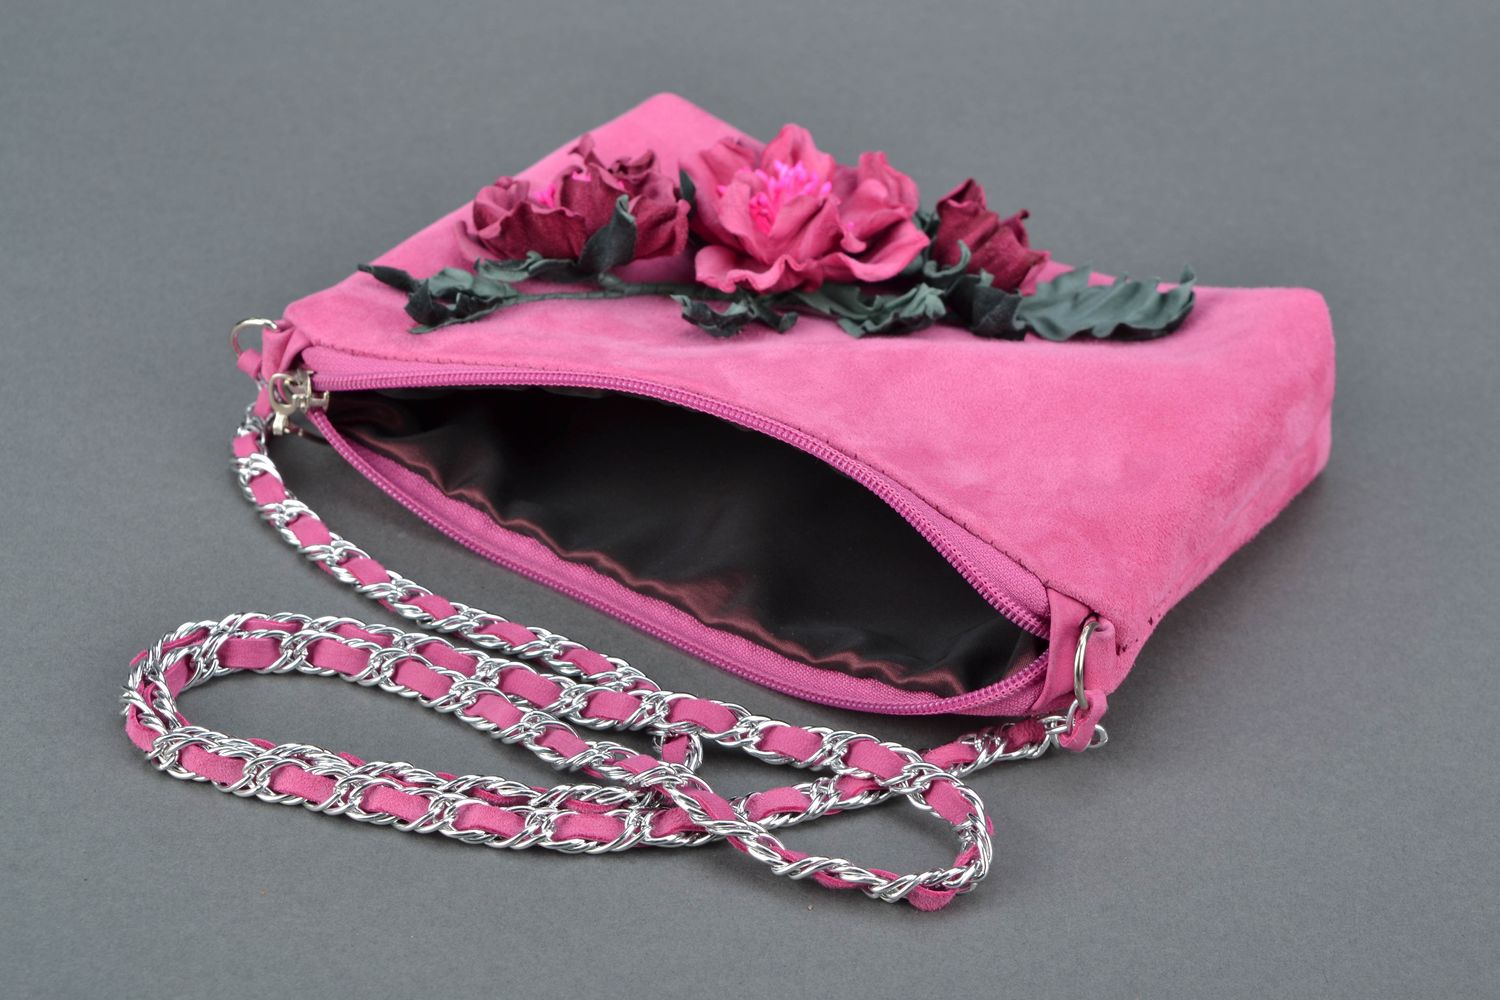 Stylish suede and leather clutch of pink color with flowers photo 4